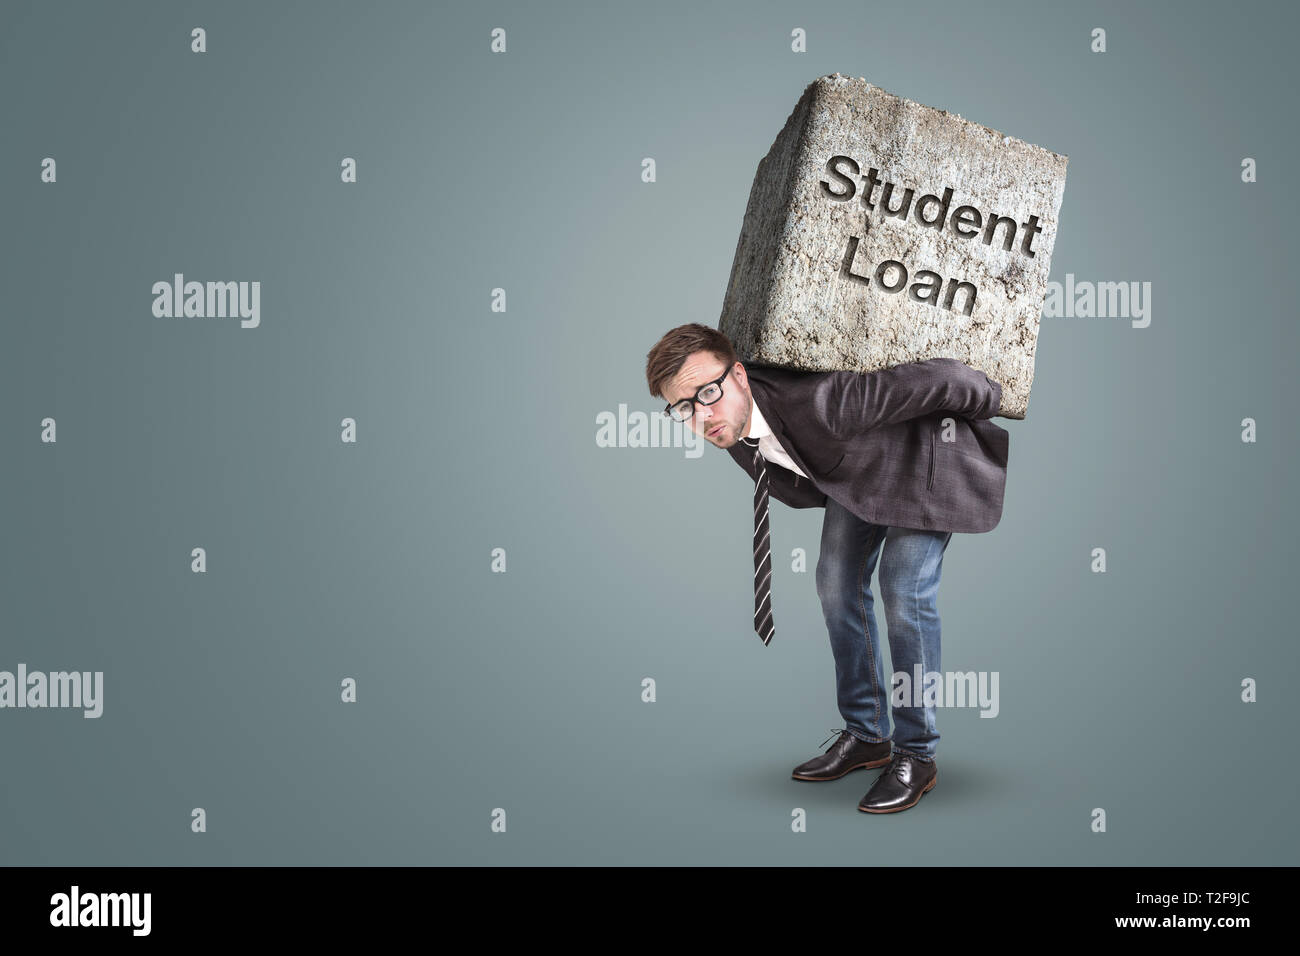 Concept of a man in a suit bending under the burden of a student loan Stock Photo